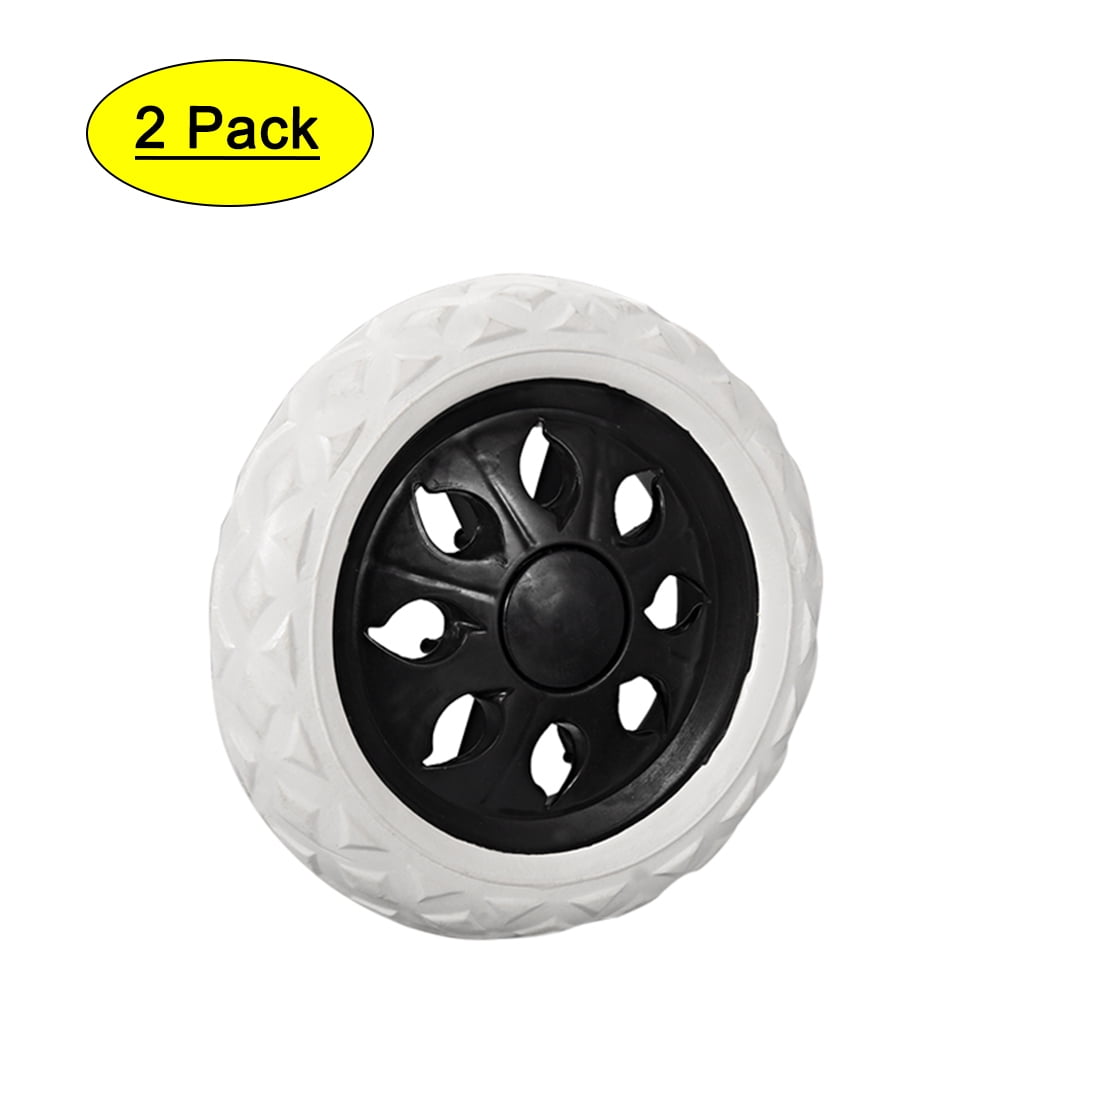 Shopping Cart Replacement Wheels Kit 5-inch Diameter Wheels with Axles Bolts 